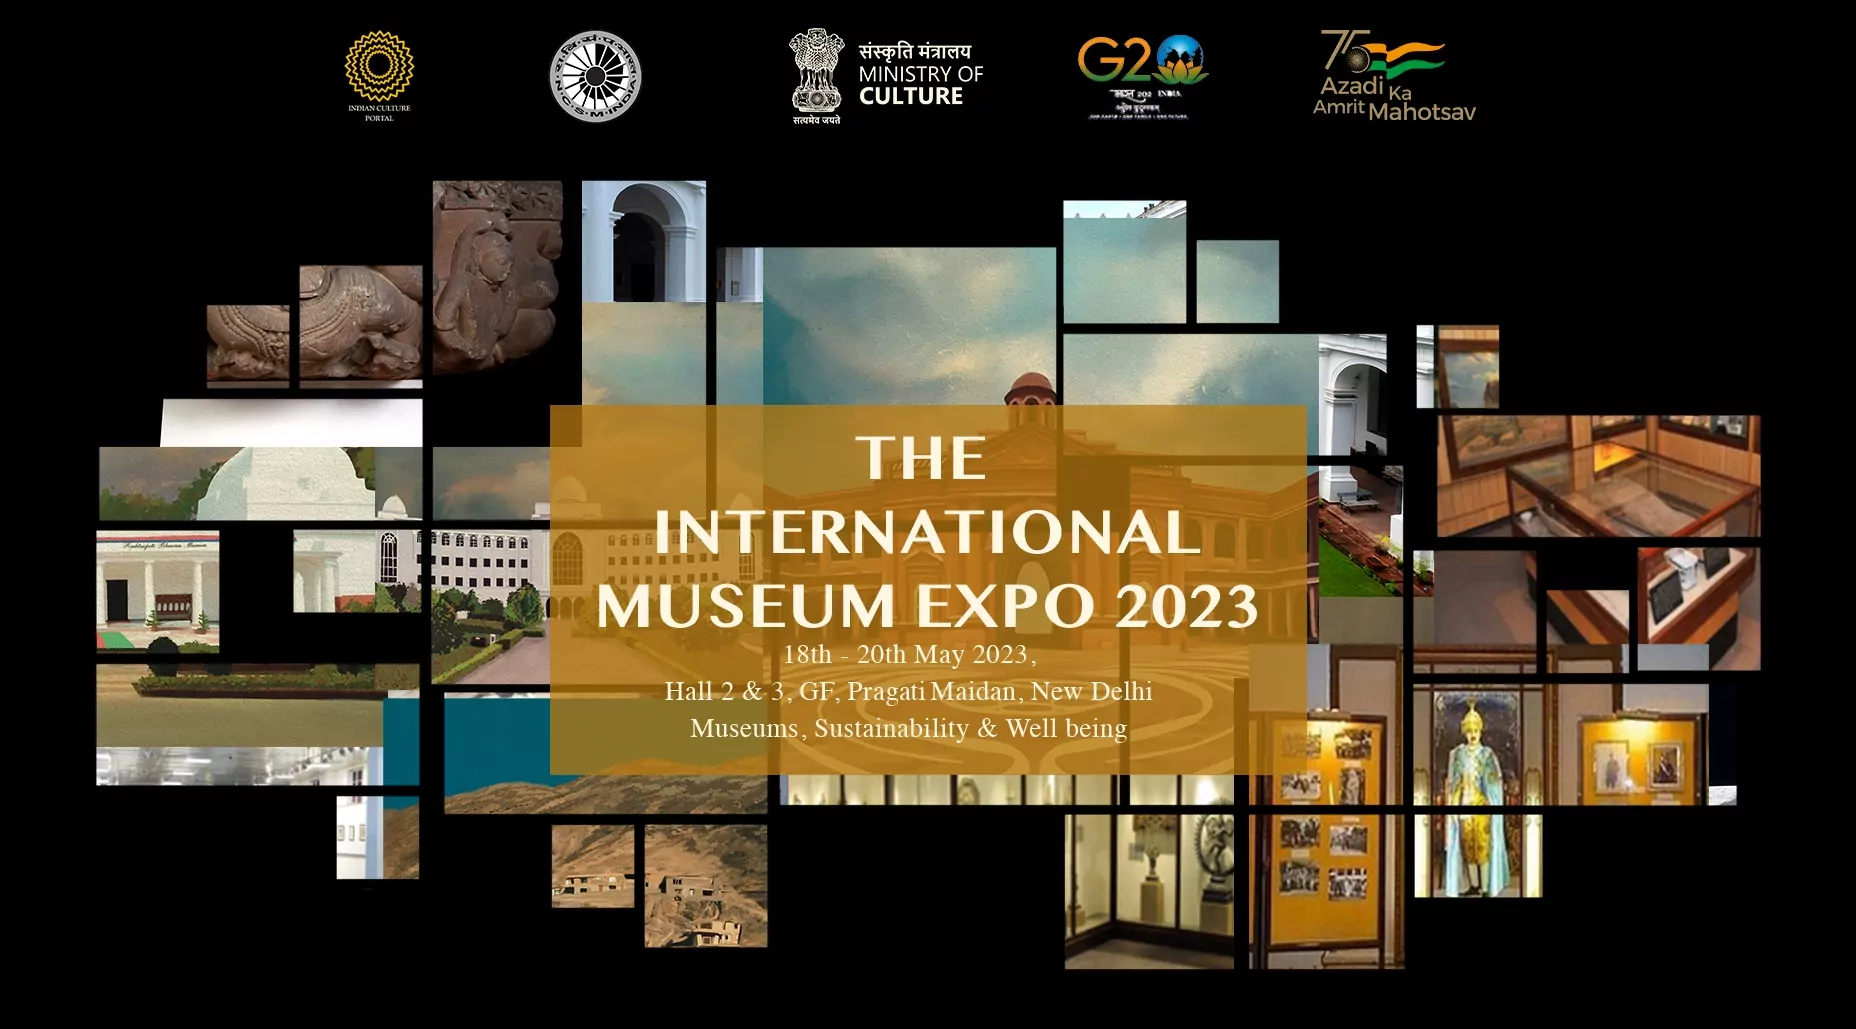 The poster for international museum expo 2023